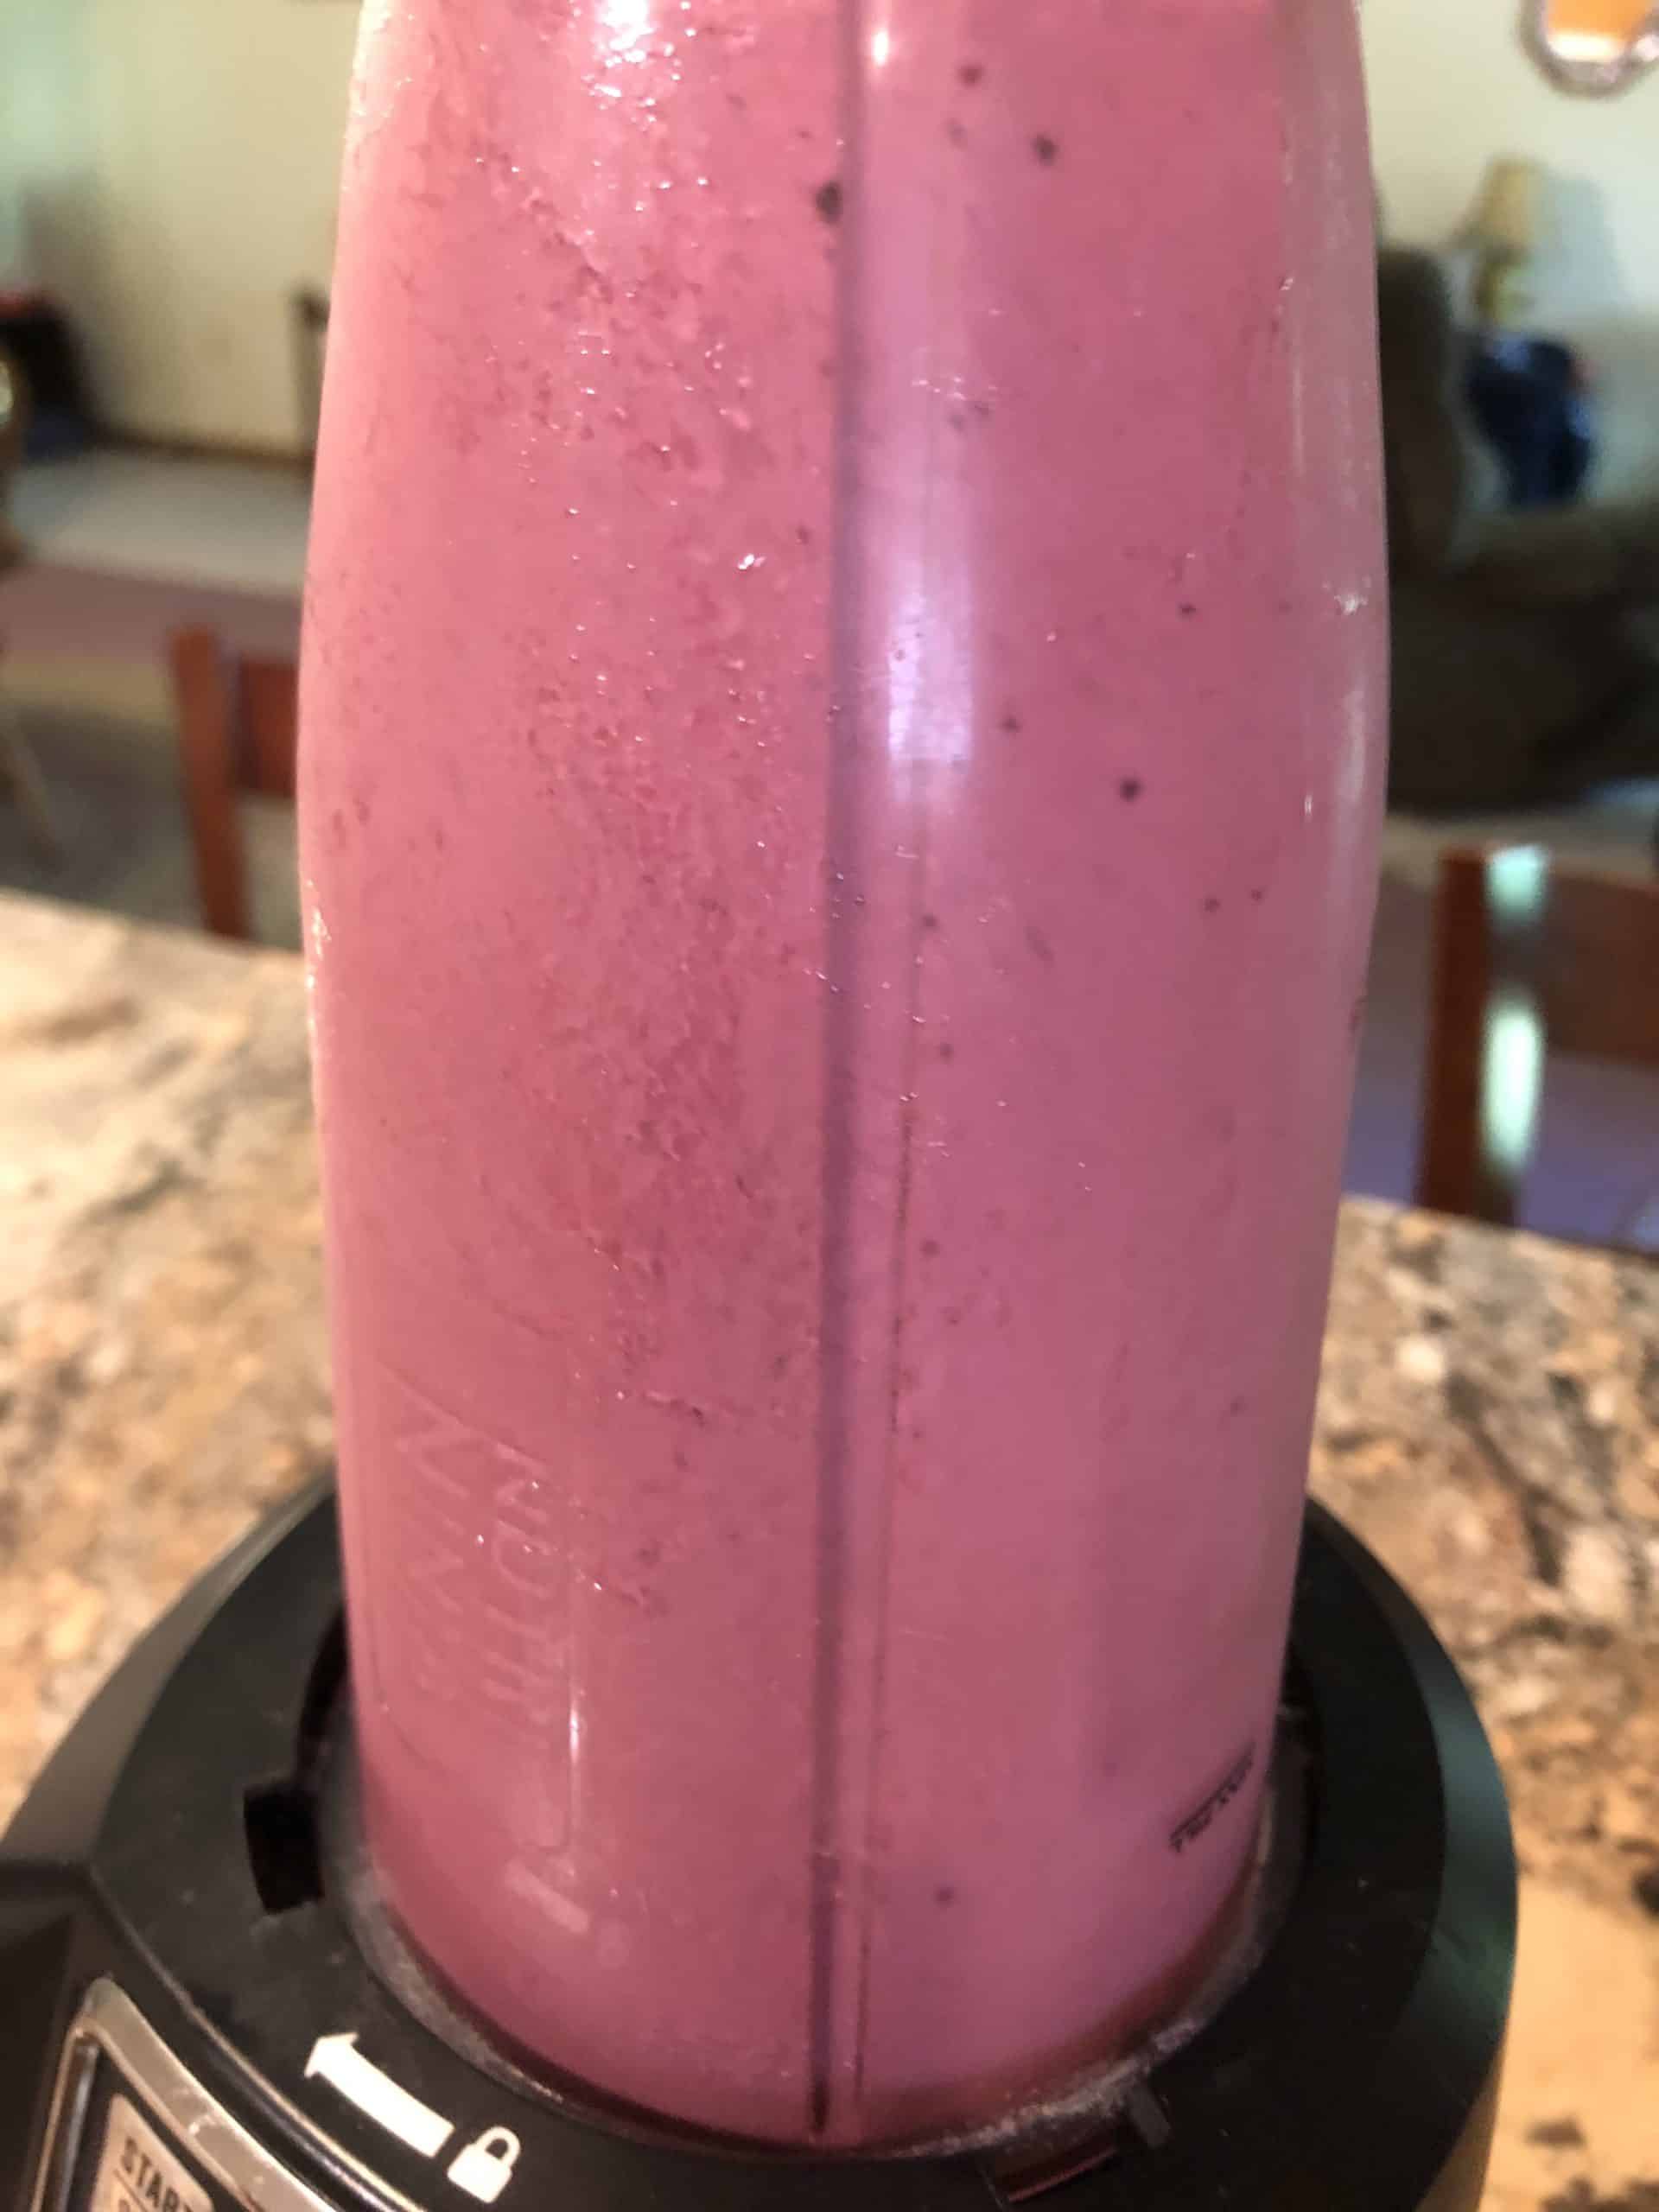 Blended Strawberry Blueberry Smoothie in blender cup